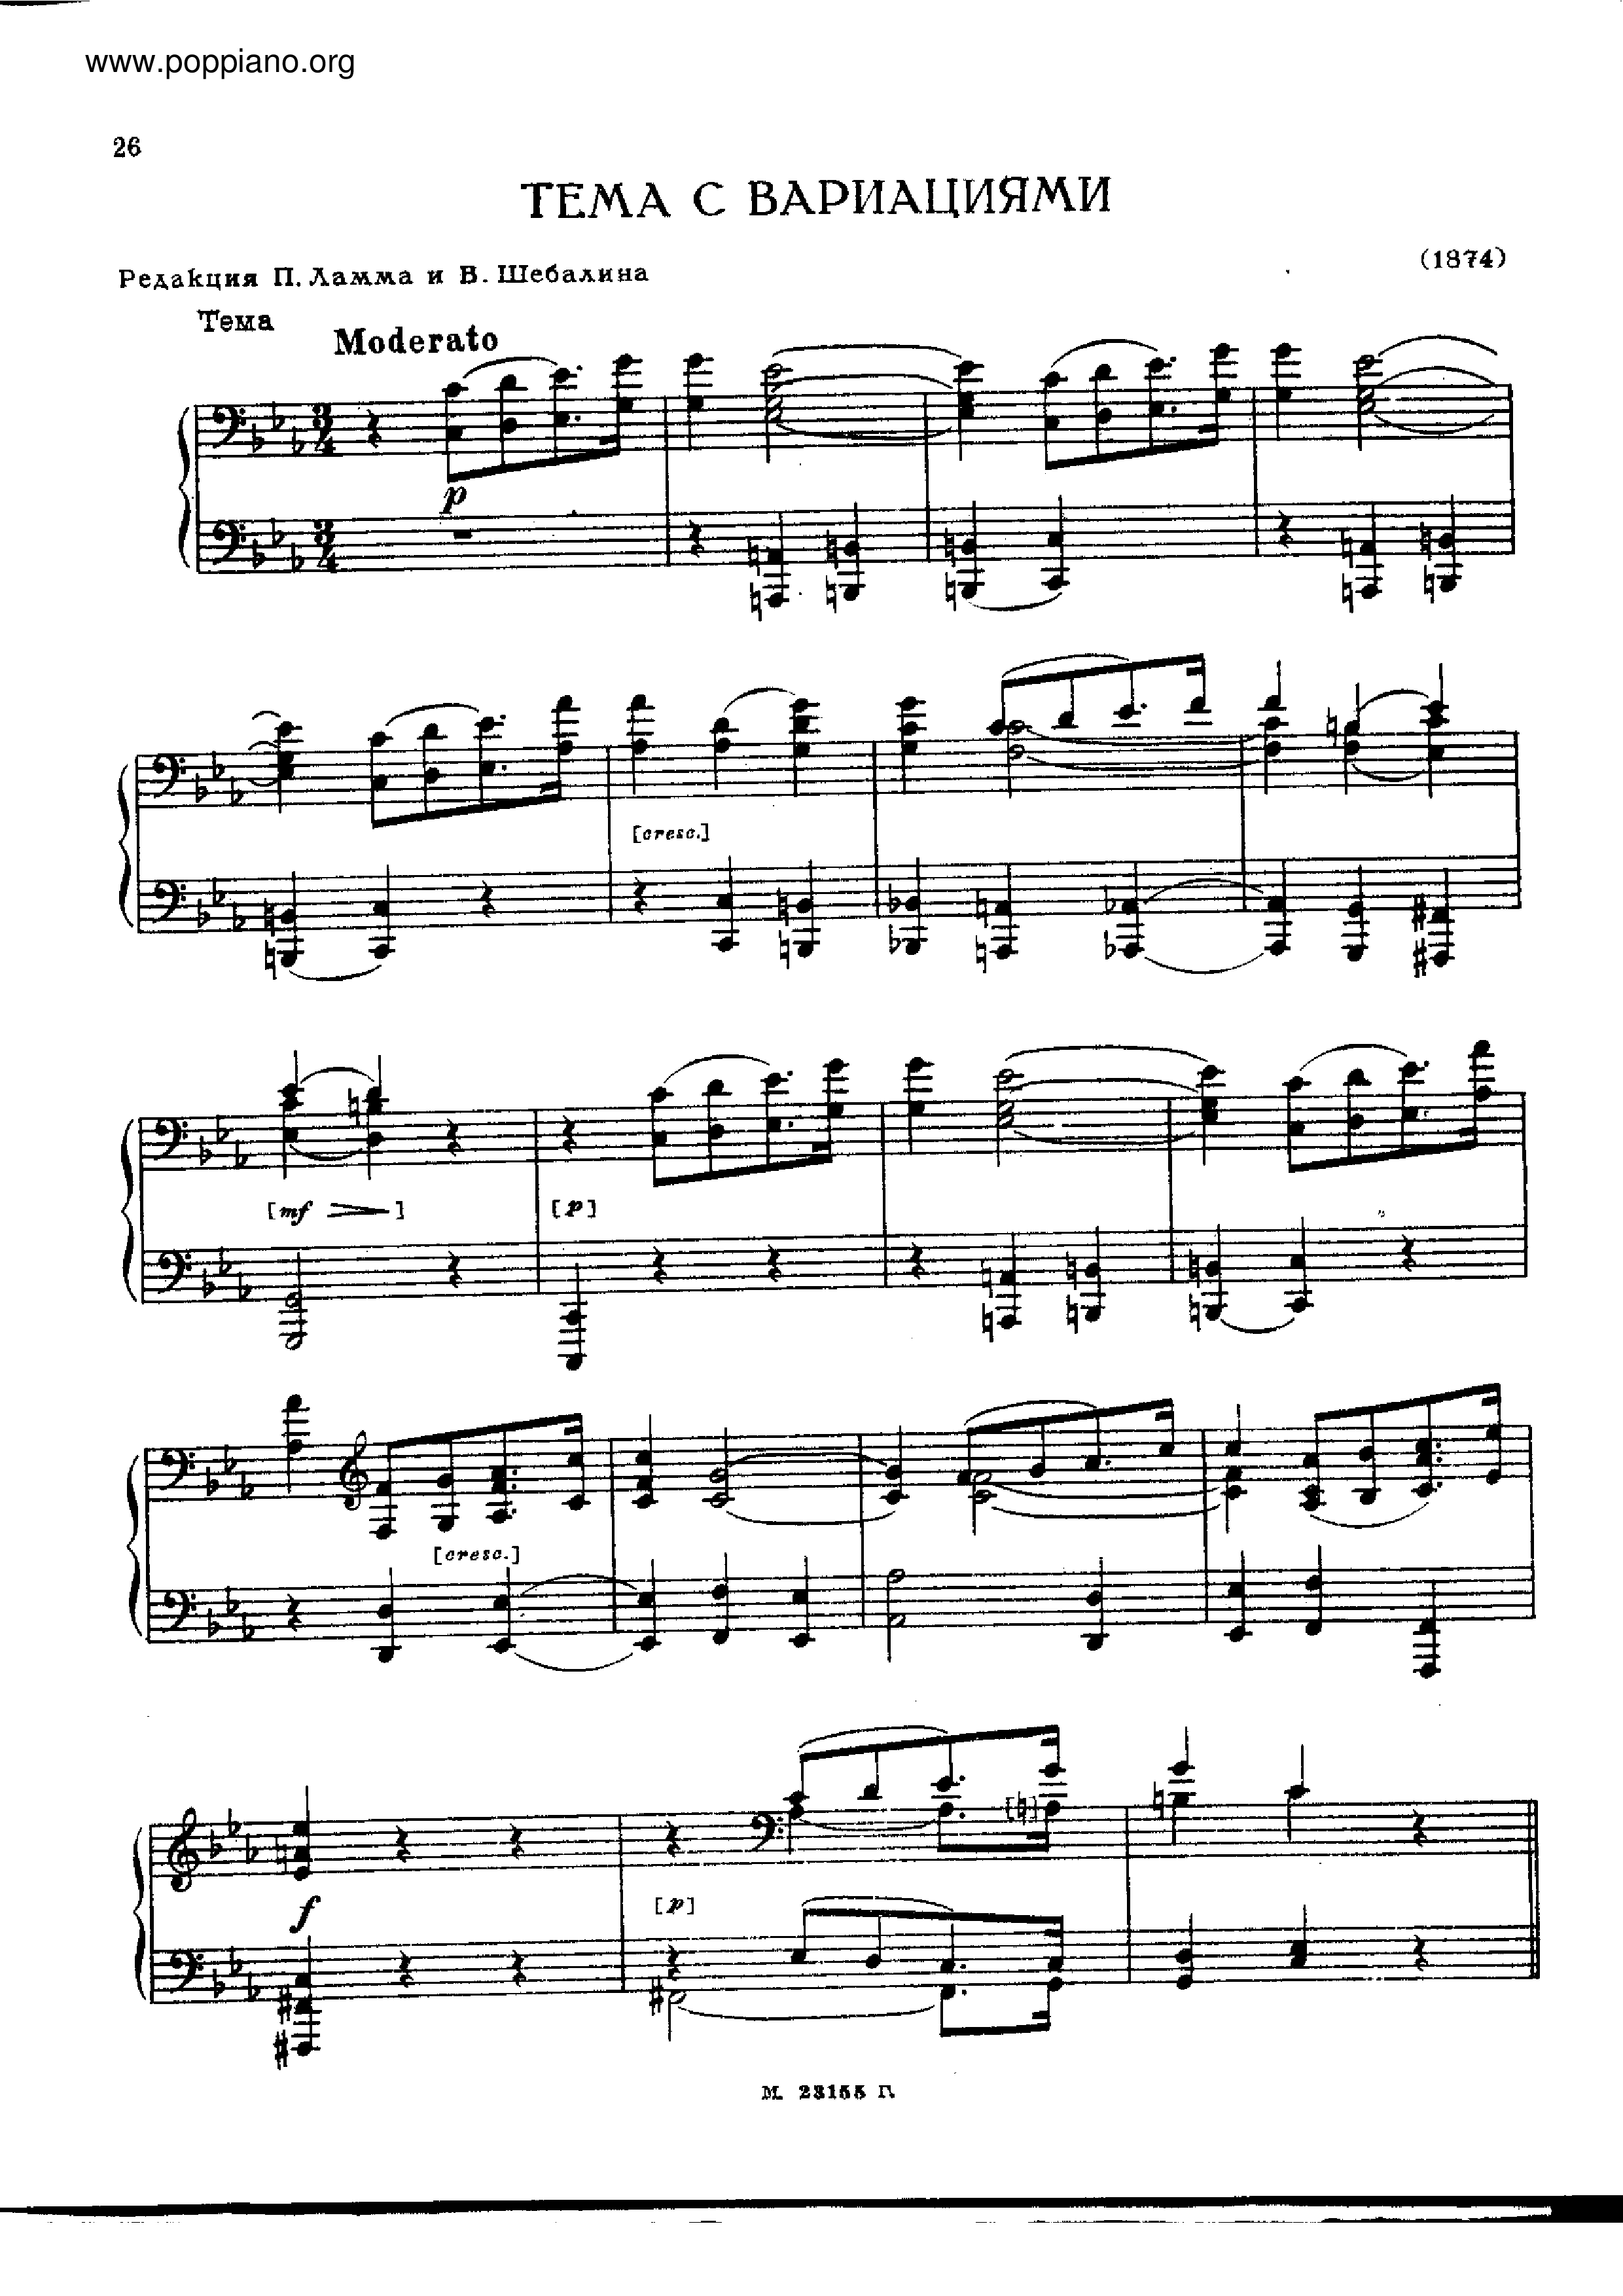 Theme and Variations Score